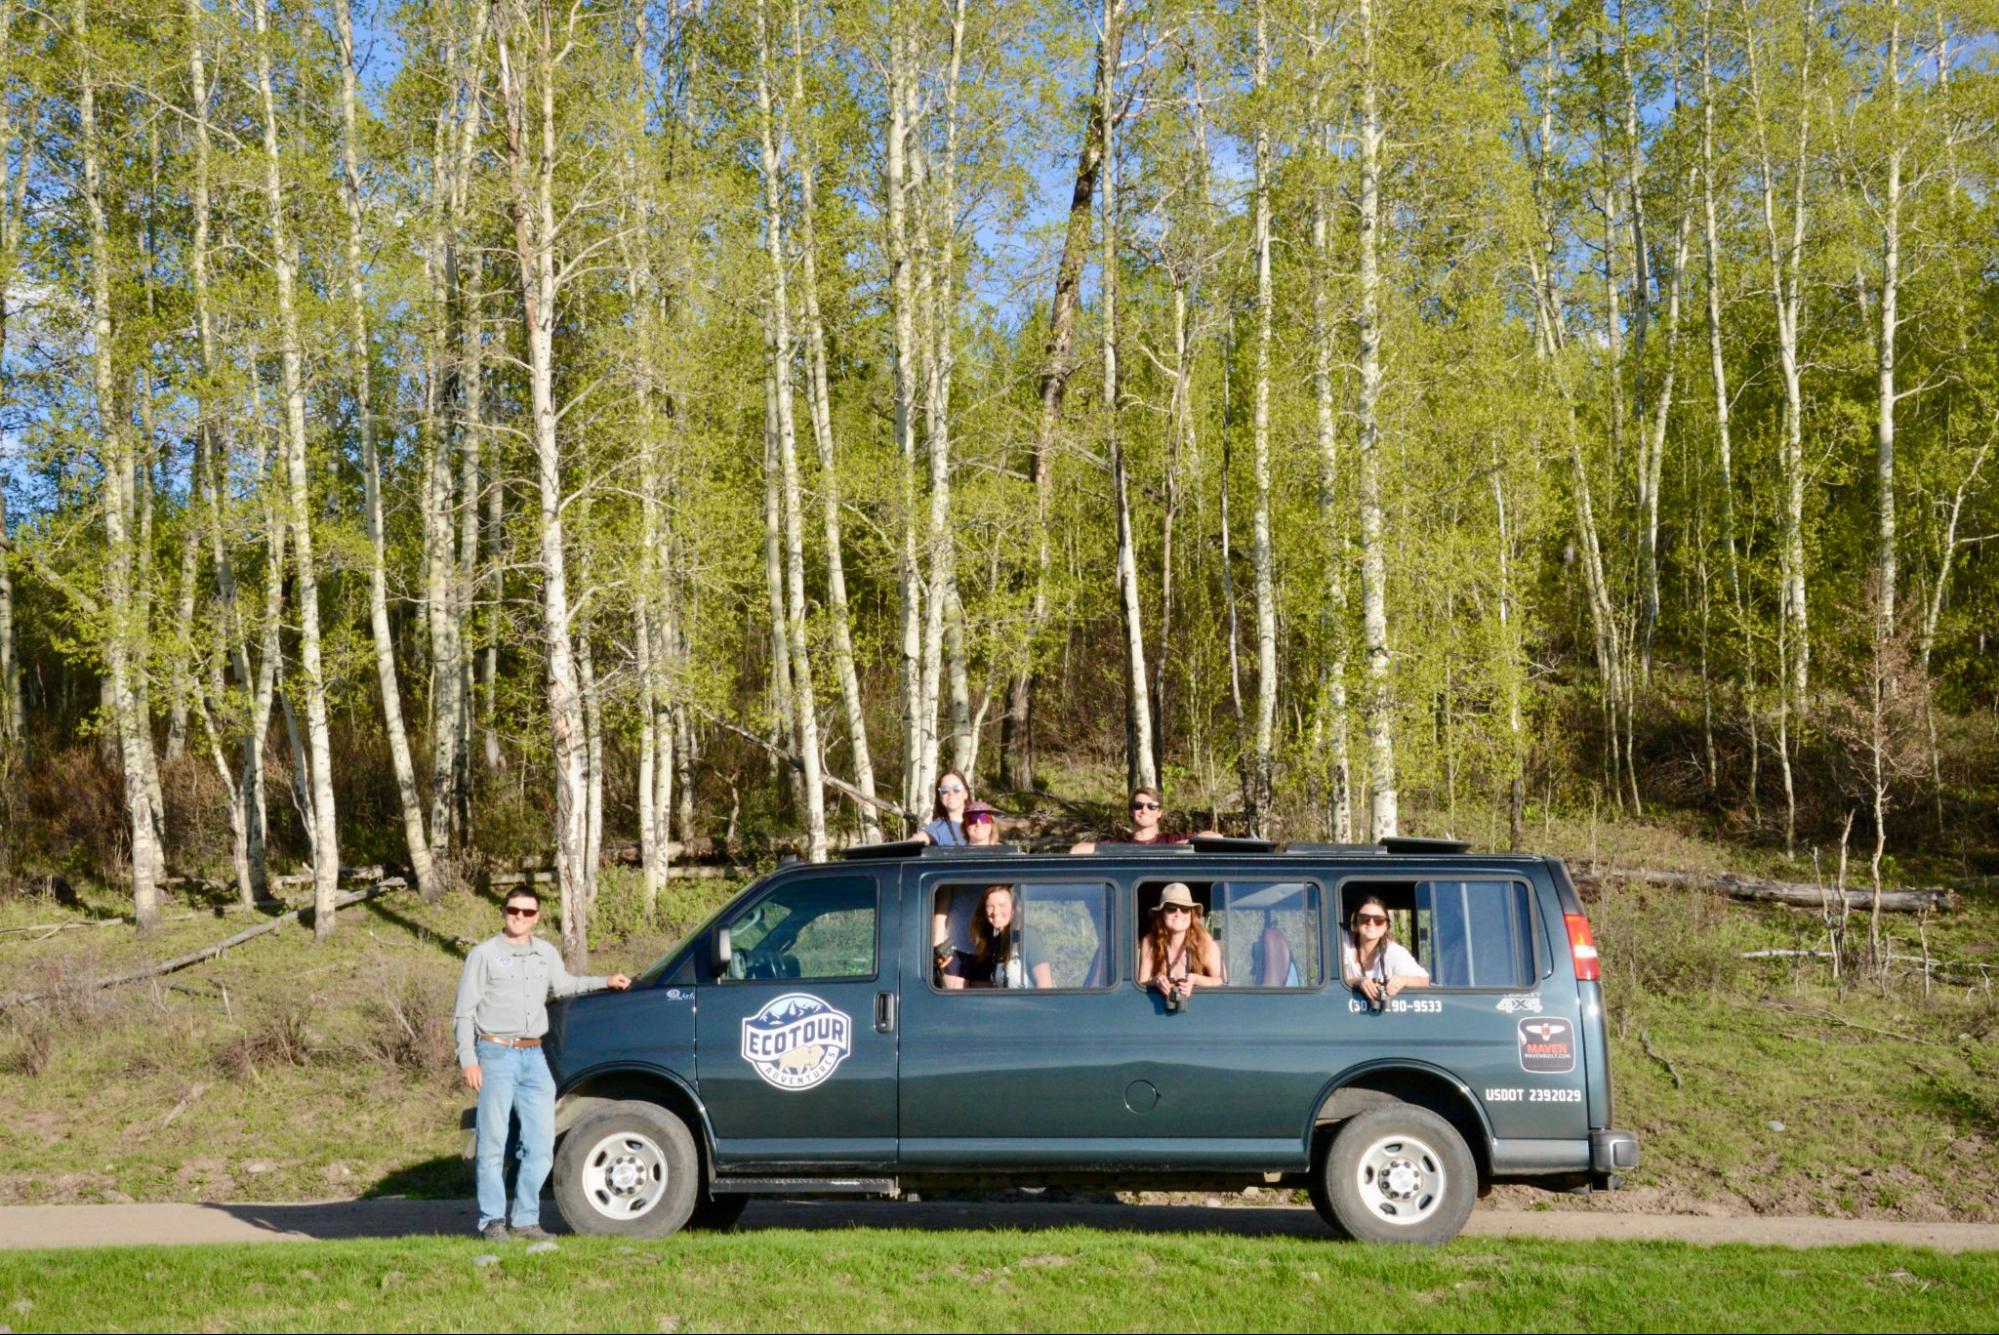 A tour group in Wyoming